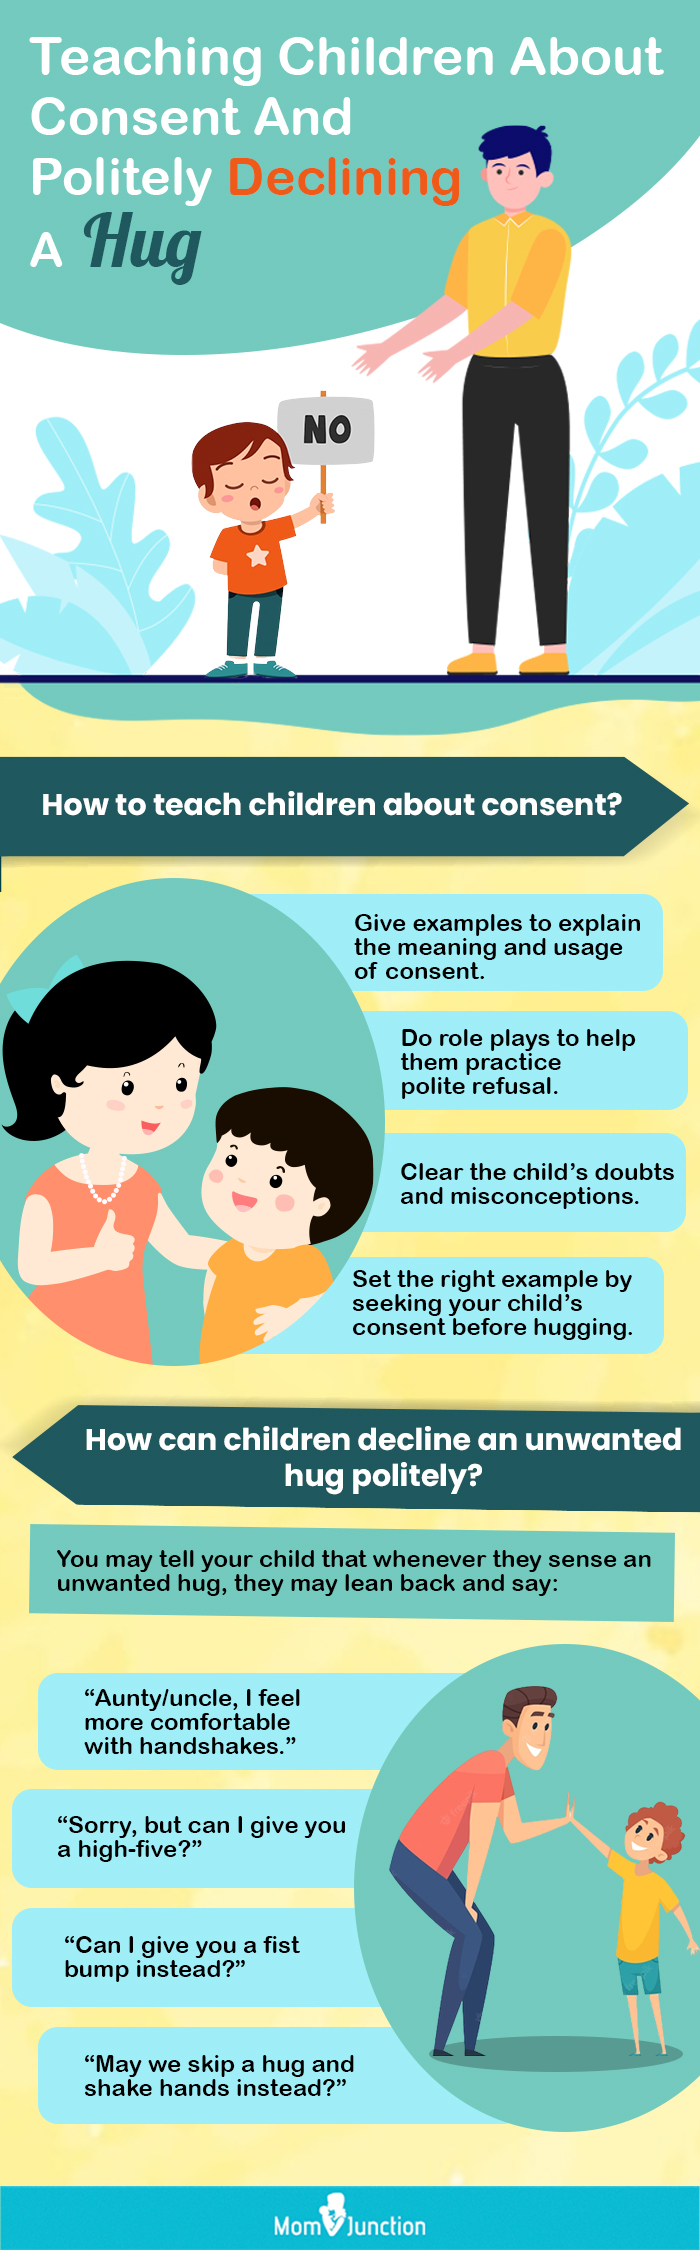 teaching children about consent and politely declining a hug (infographic)